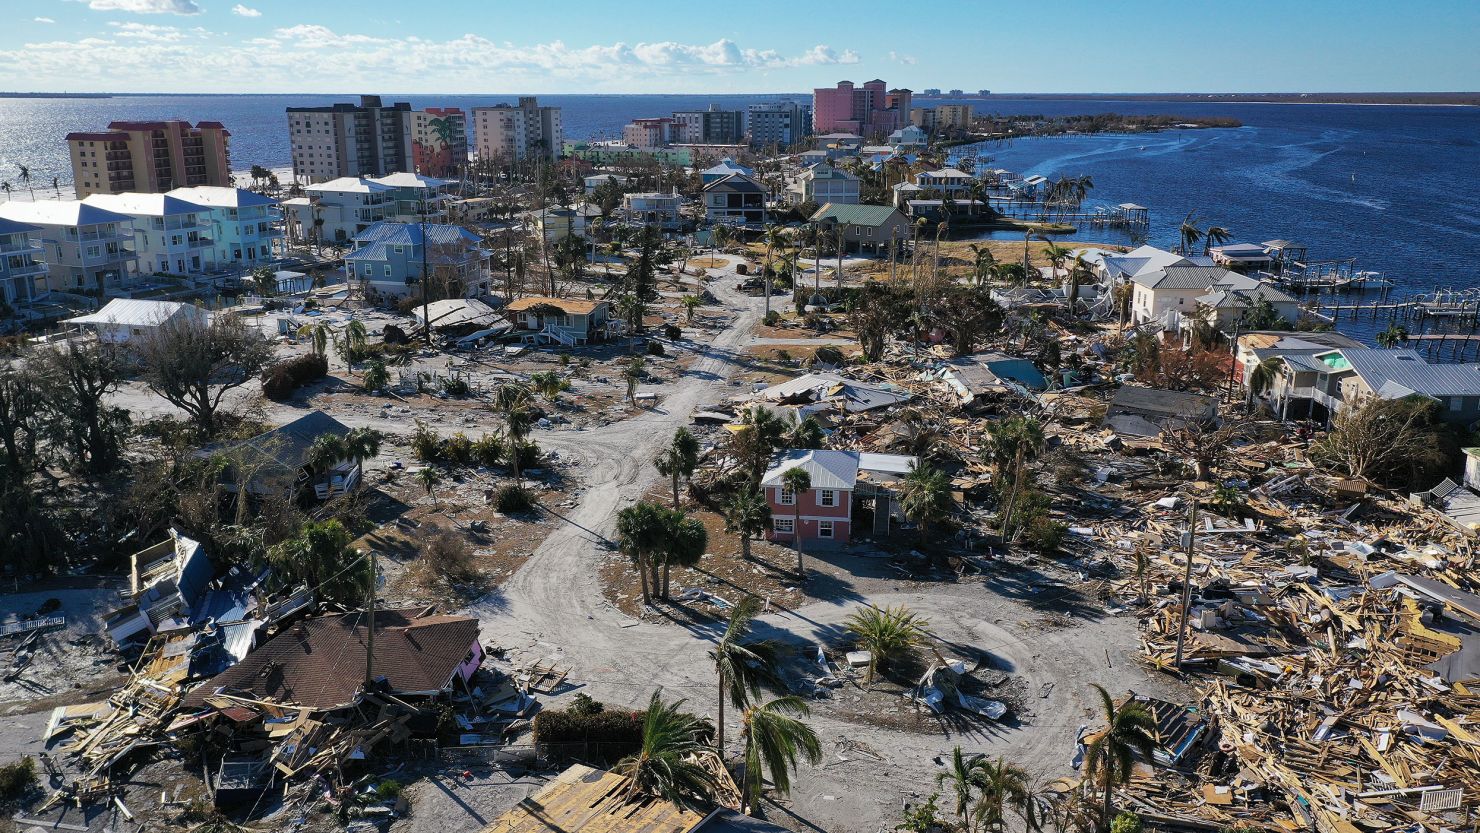 The destruction left in the wake of Hurricane Ian in Fort Myers Beach, Florida.